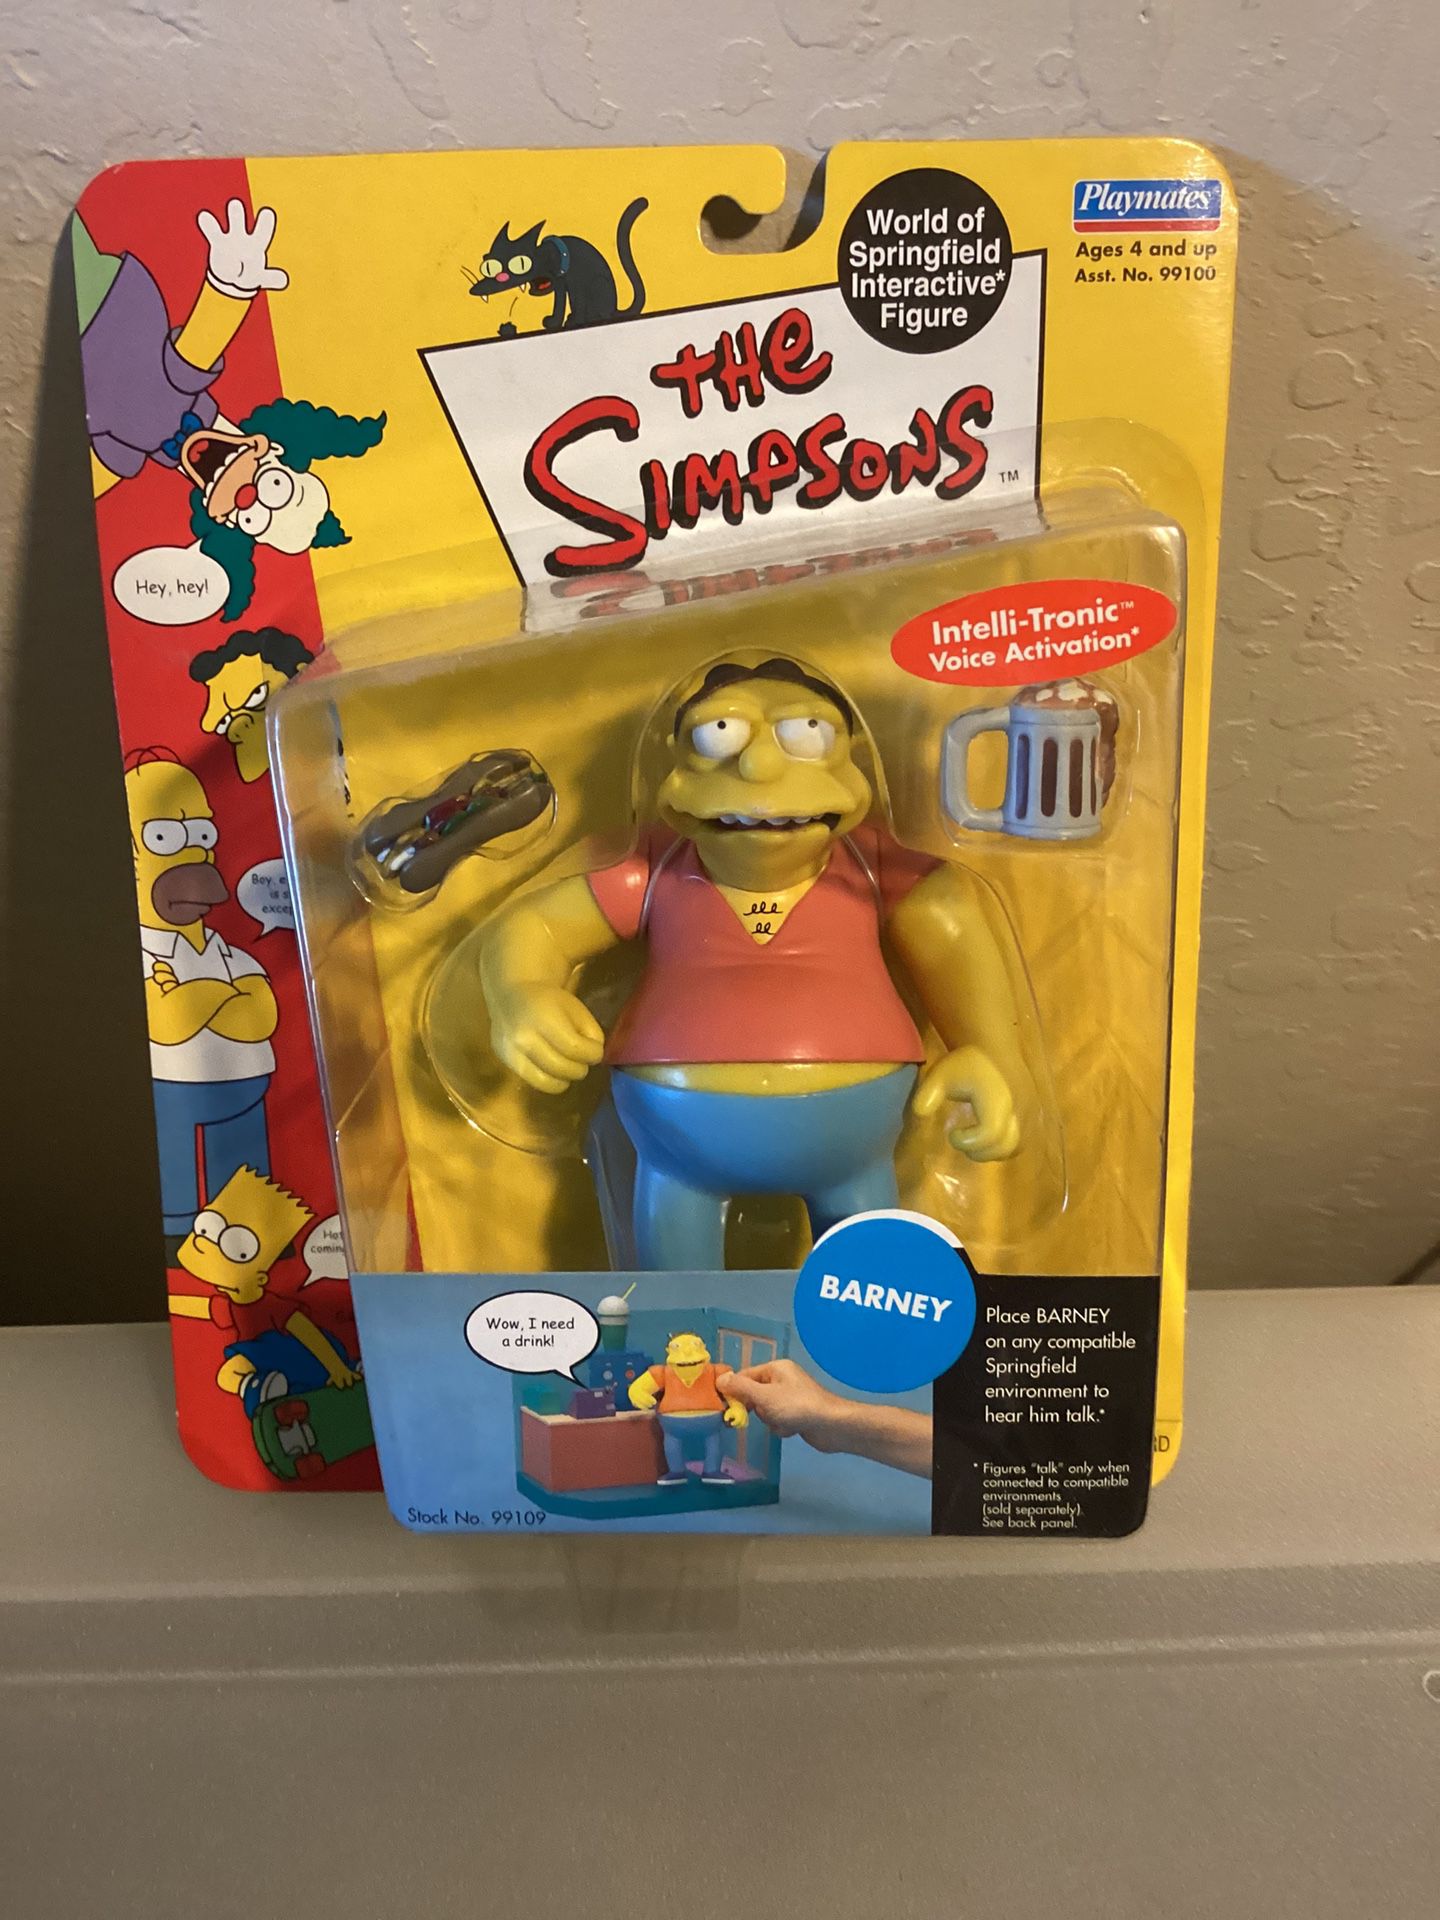 The Simpsons World Of Springfield Interactive Figure BARNEY